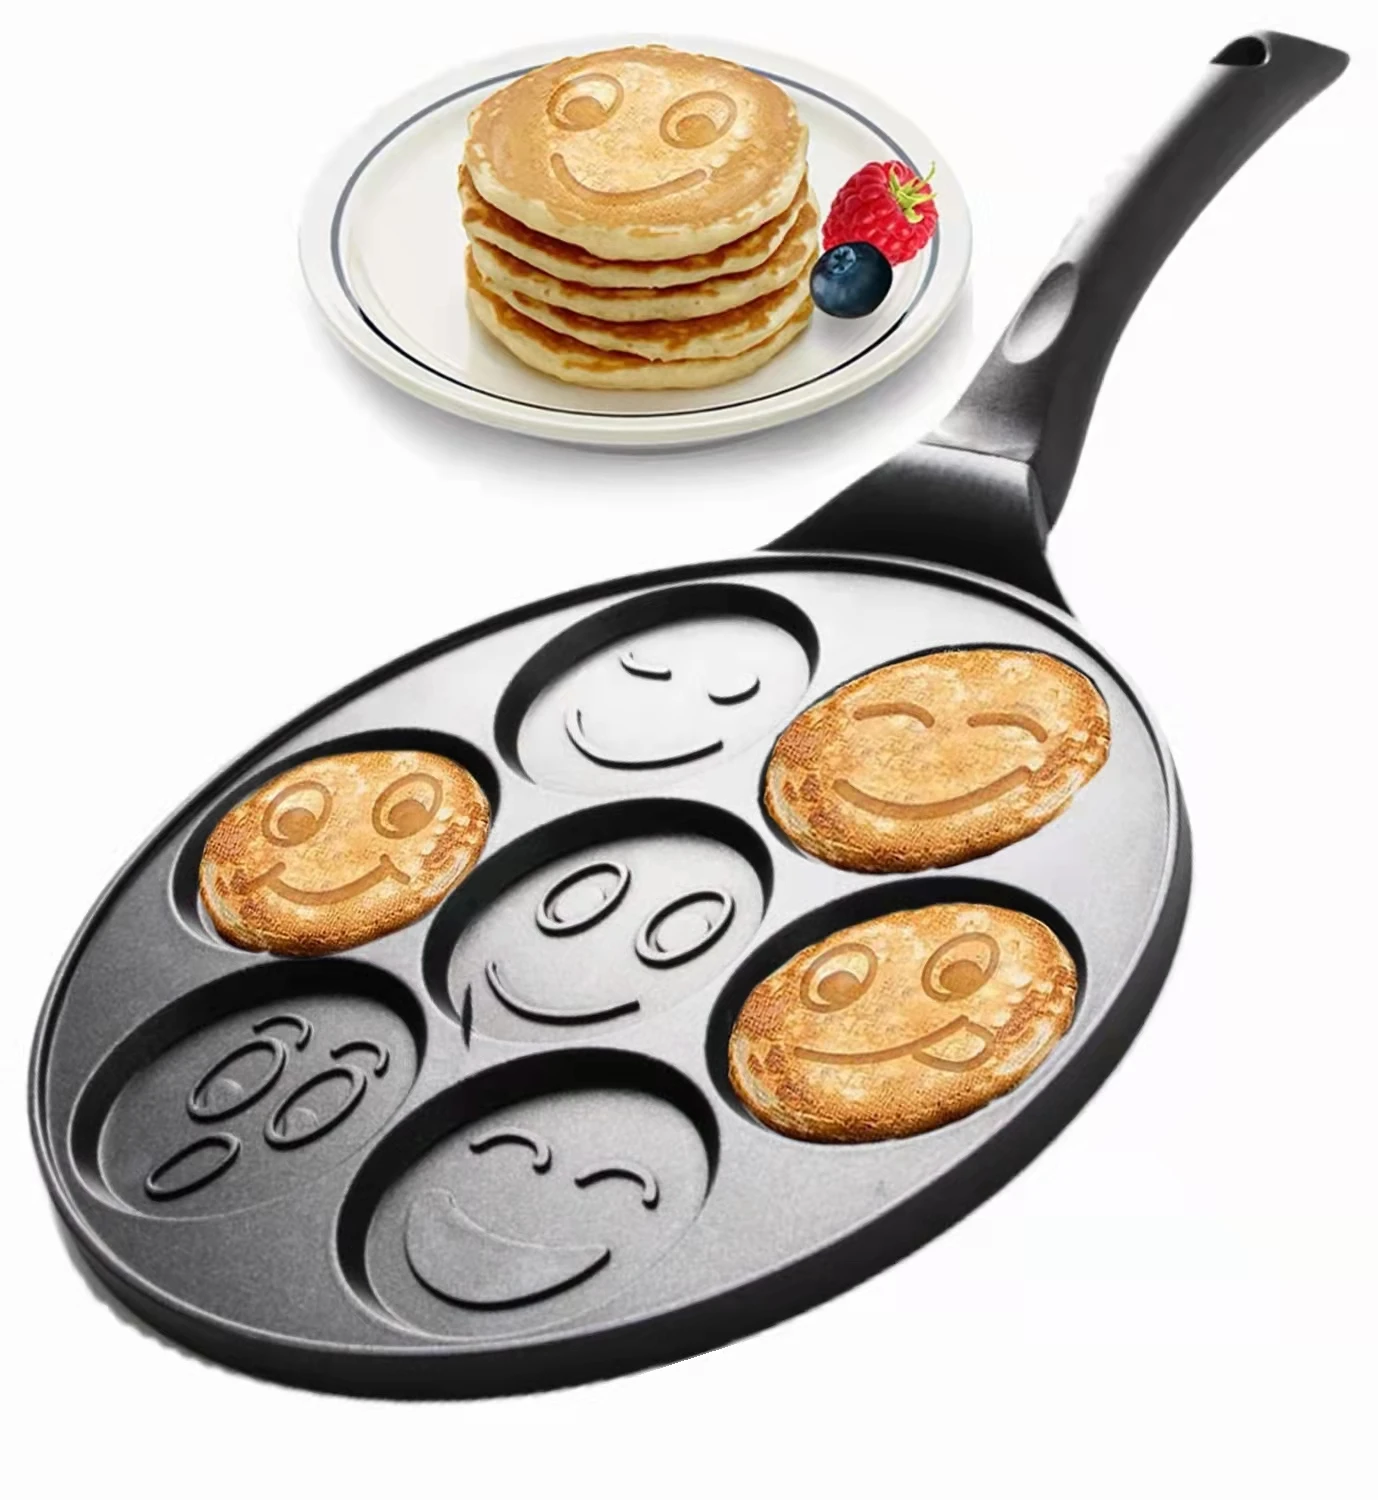 

7 Holes 26cm Smiley Face Mini Pancake Non-stick Waffle Baking Breakfast Cookie Omelette Egg Fry Pan, Natural color